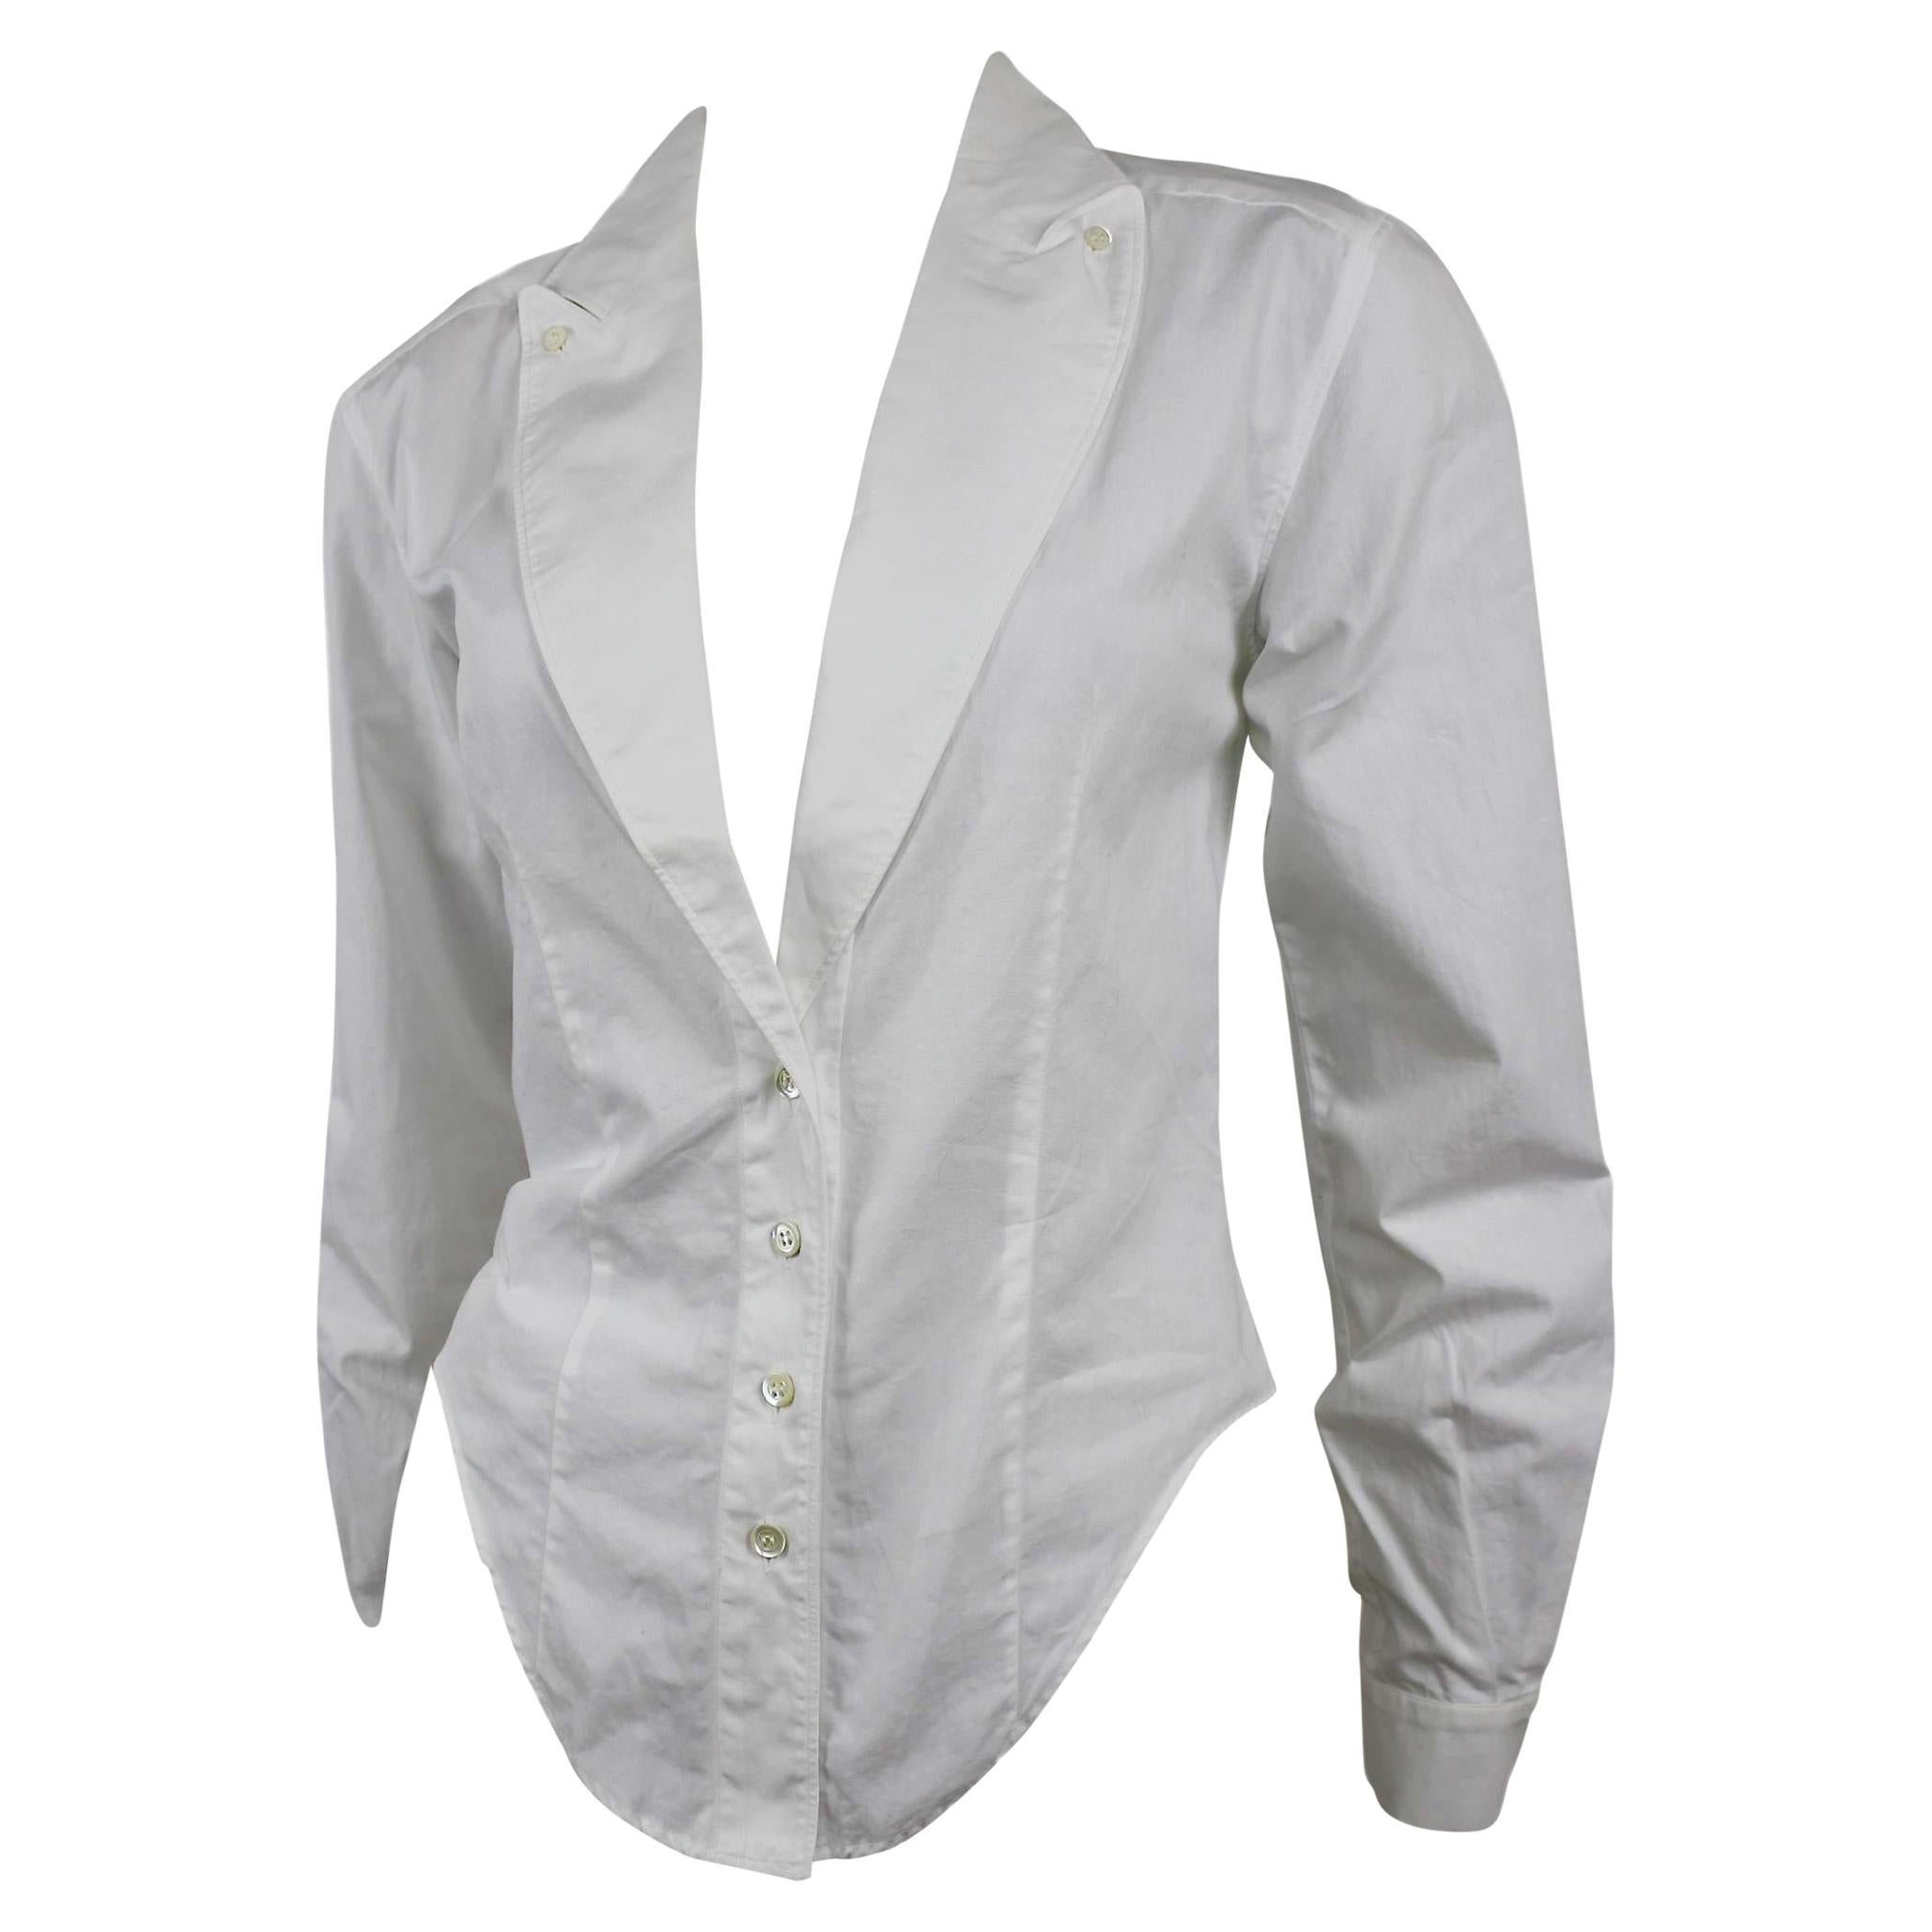 Alexander McQueen Early Collection Fitted Blouse/Jacket For Sale